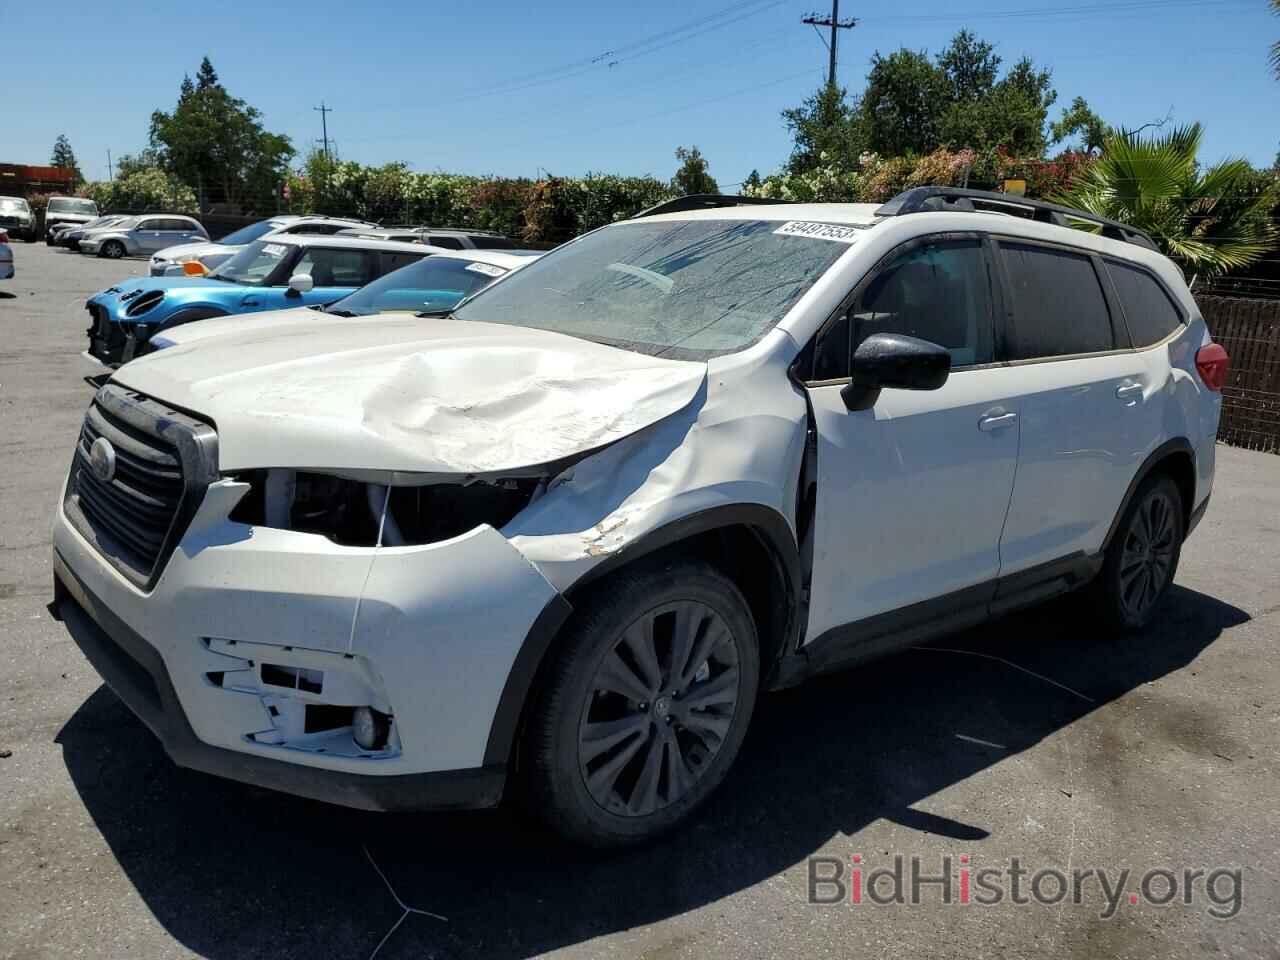 Photo 4S4WMAGD0N3469166 - SUBARU ASCENT ONY 2022